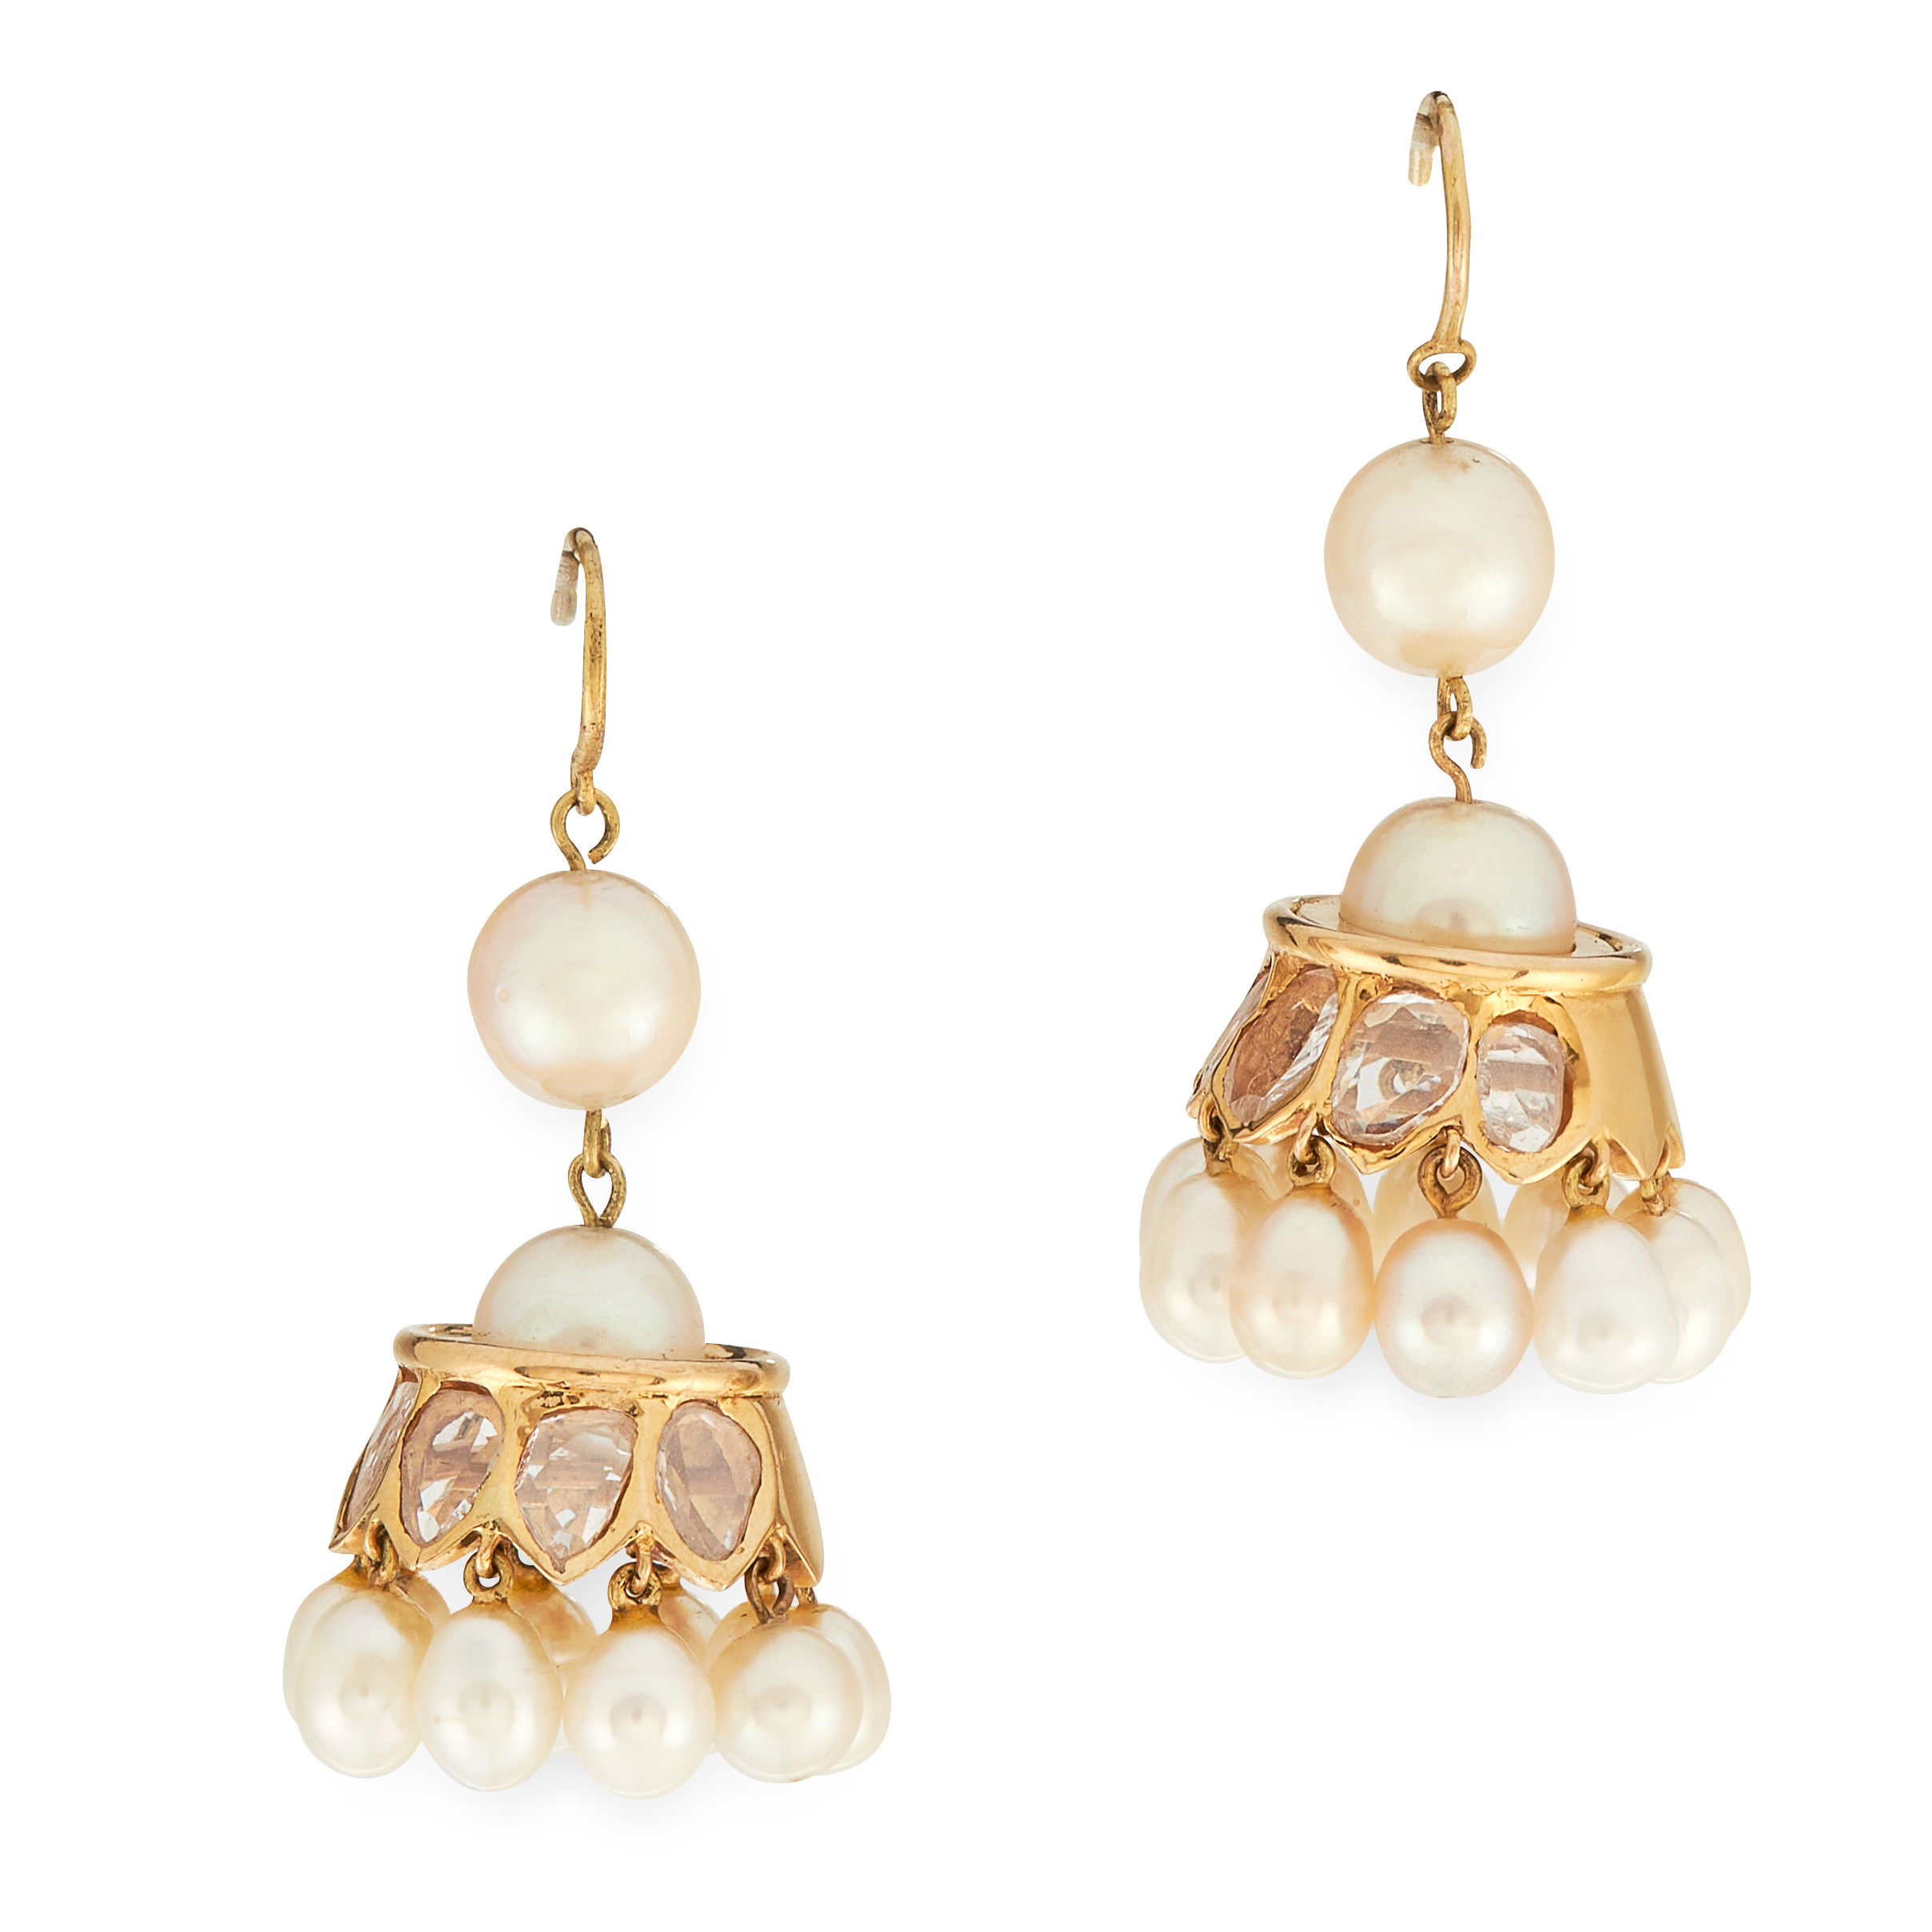 A PAIR OF PEARL AND DIAMOND EARRINGS in yellow gold, each set with rose cut diamonds, suspending